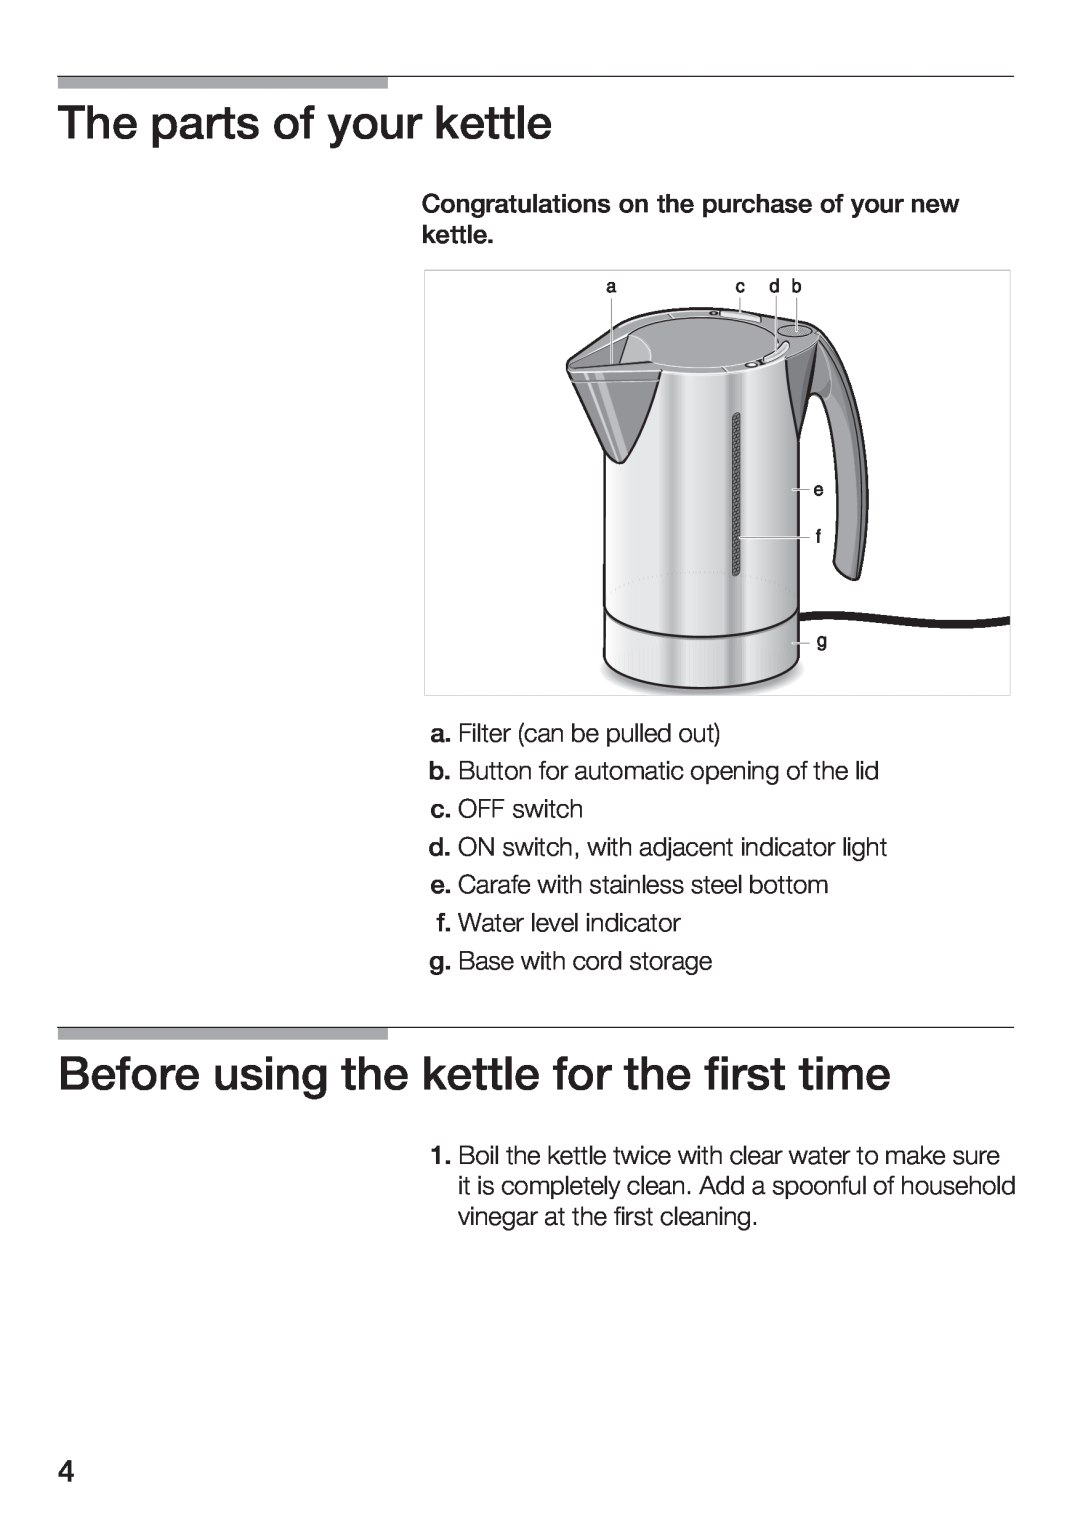 Bosch Appliances TWK 911 UC manual The parts of your kettle, Before using the kettle for the first time 